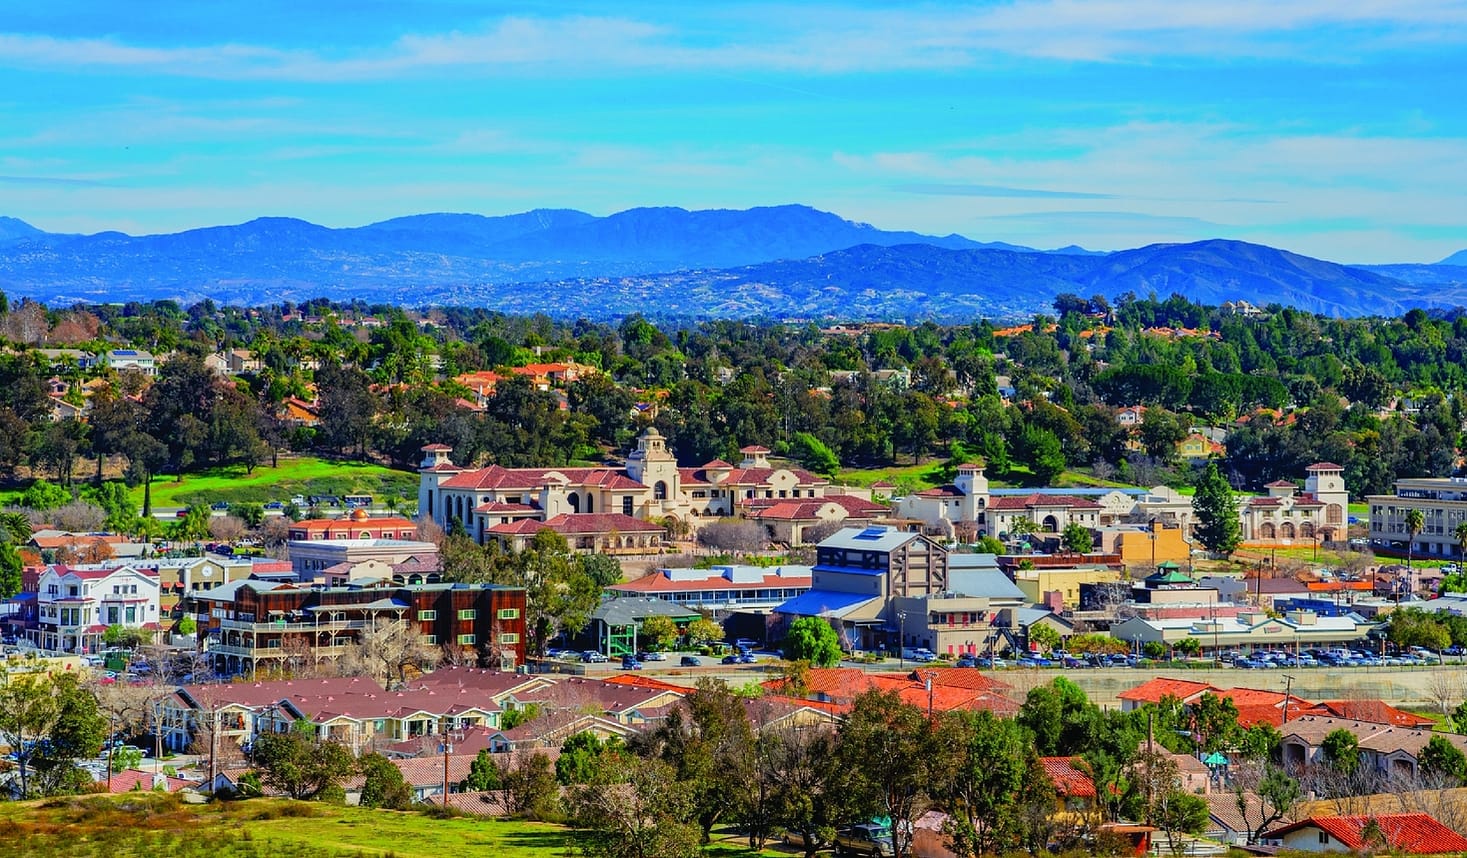 Temecula Image Old Town